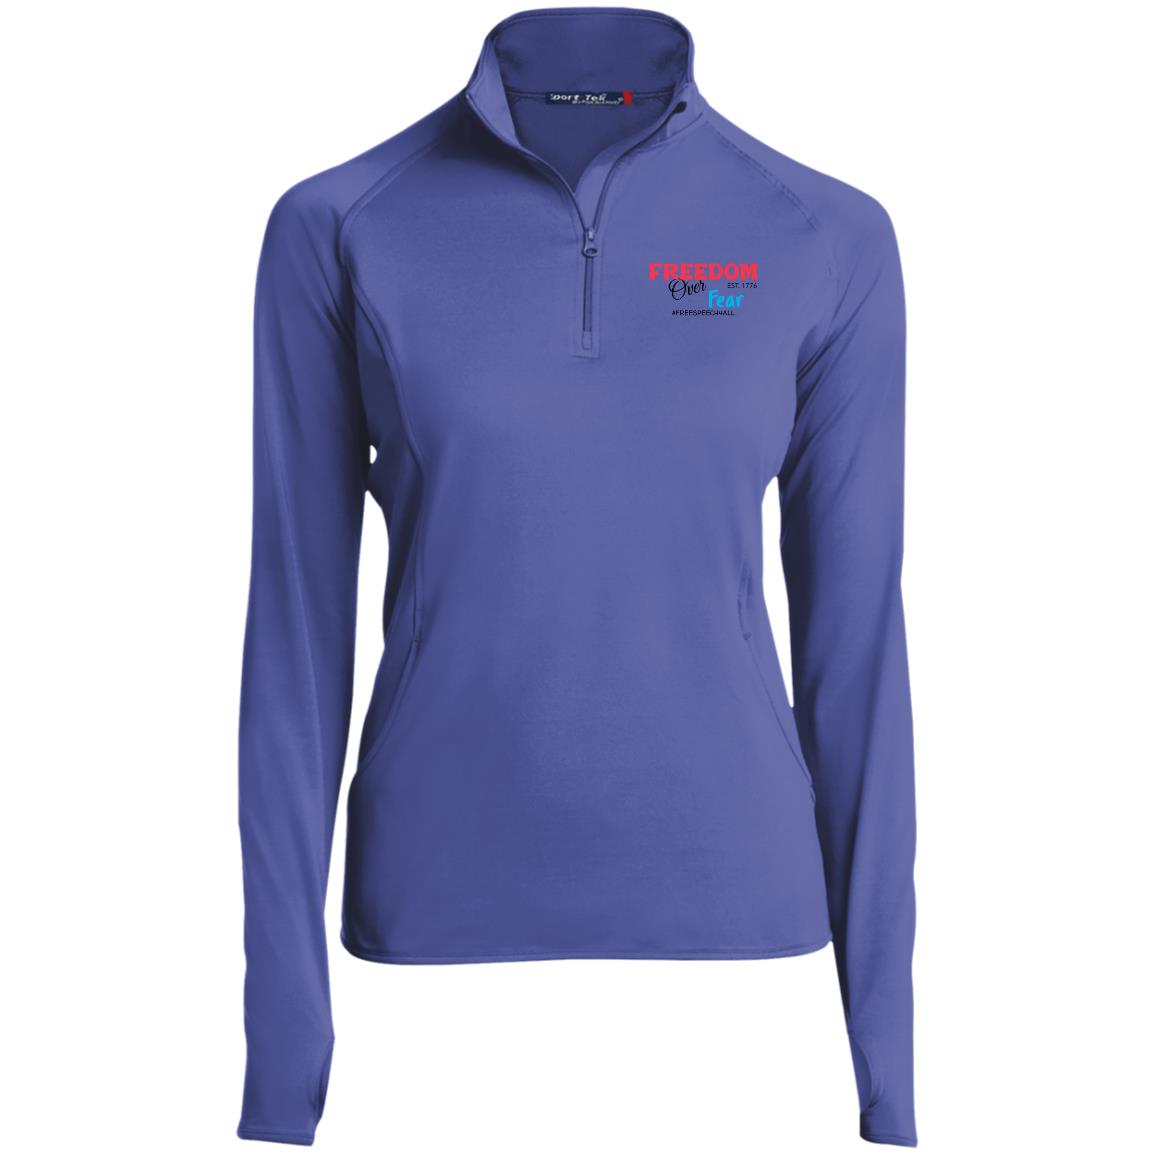 Freedom Over Fear Ladies' 1/2 Zip Performance Pullover